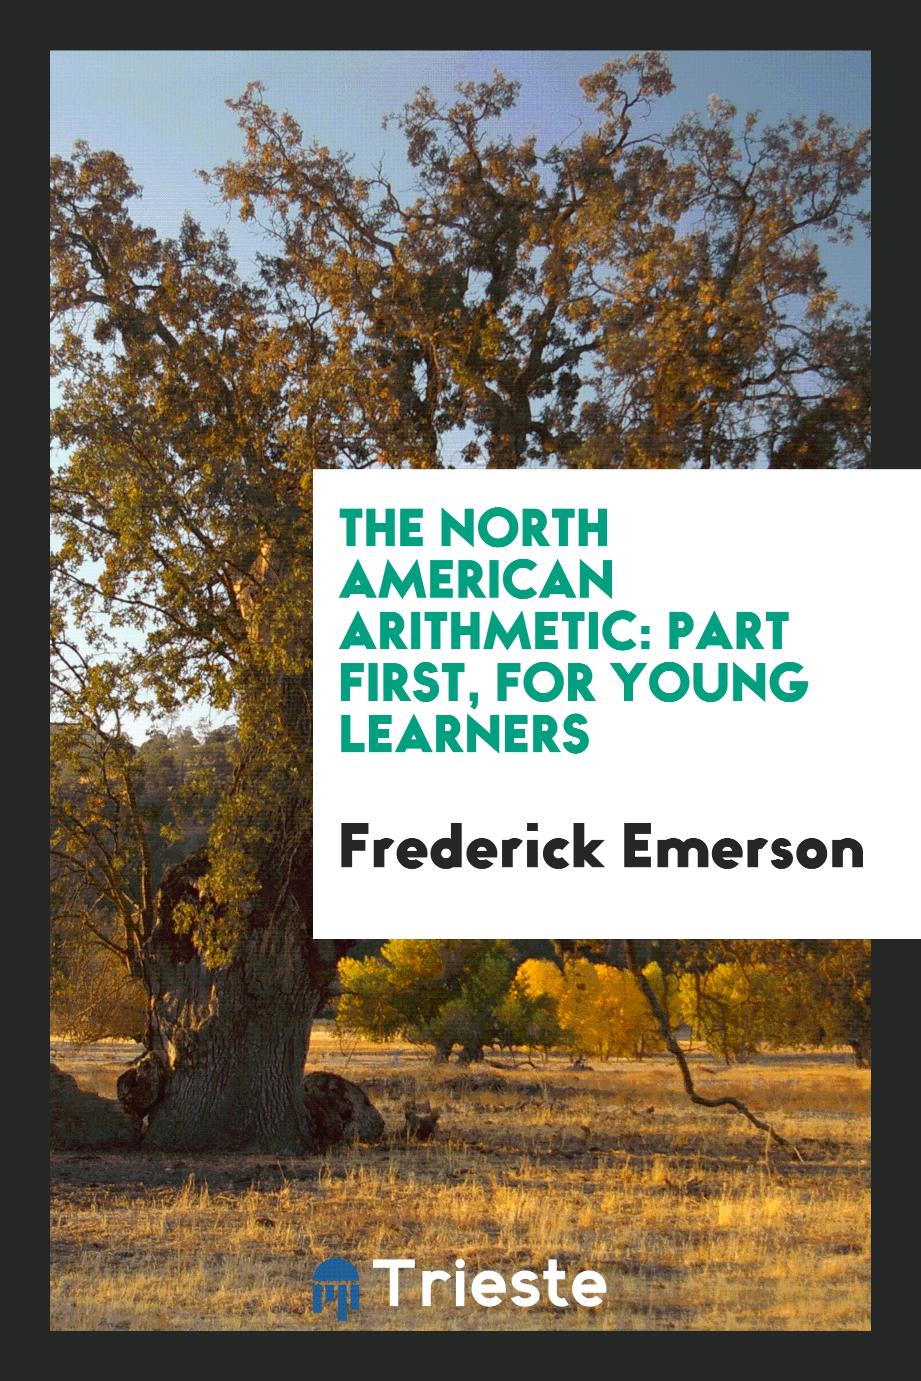 Frederick Emerson - The North American Arithmetic: part first, for young learners